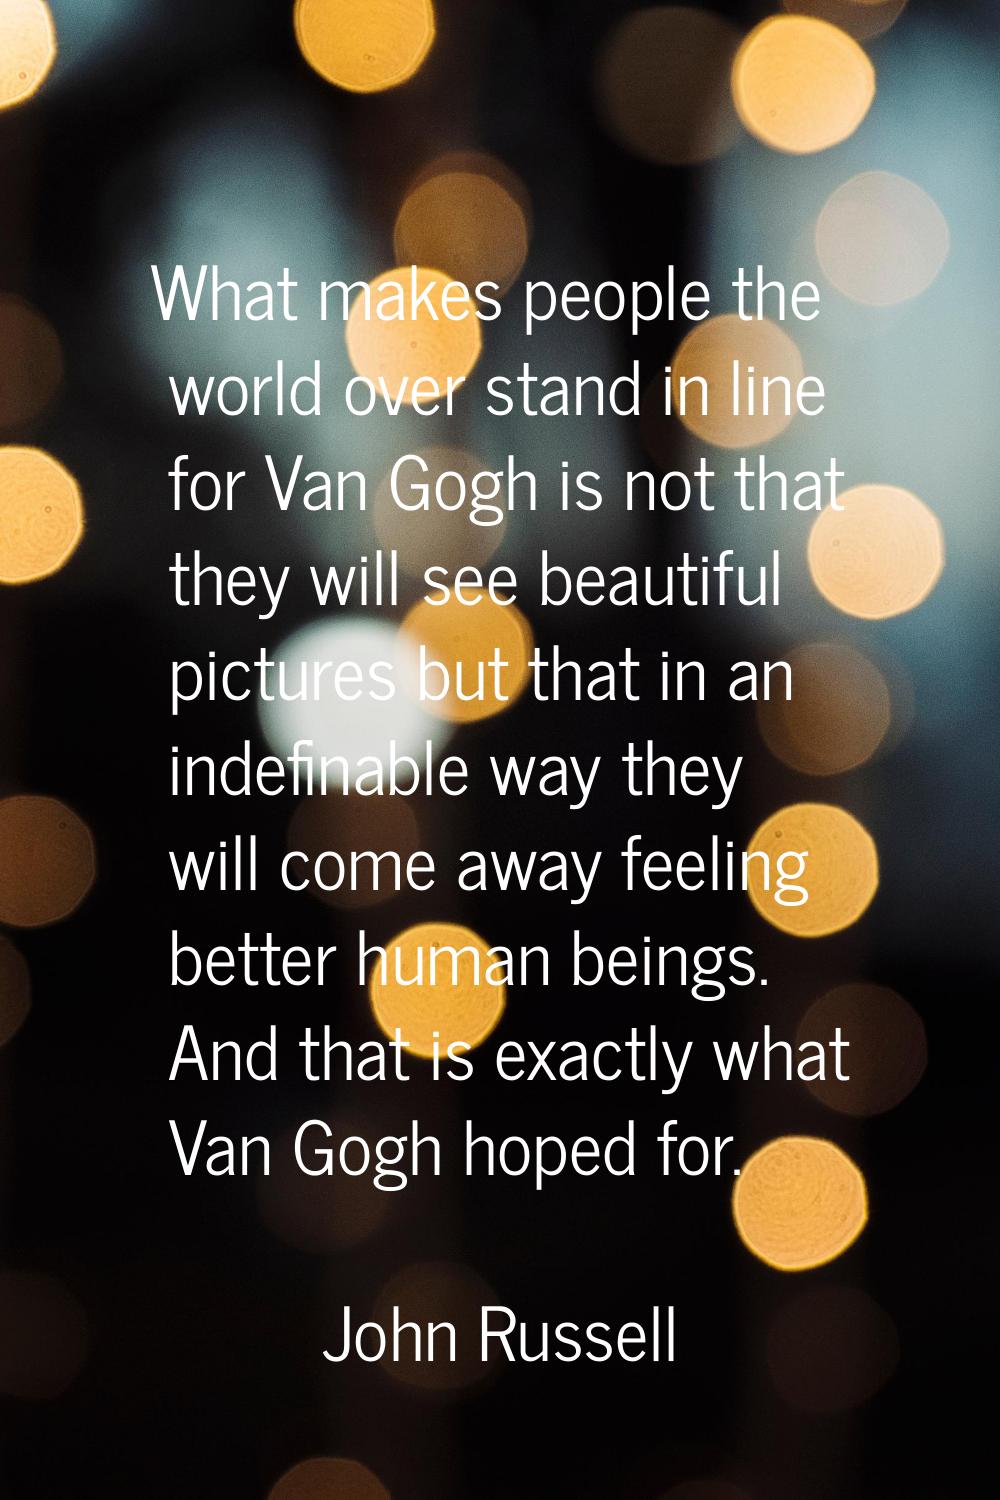 What makes people the world over stand in line for Van Gogh is not that they will see beautiful pic